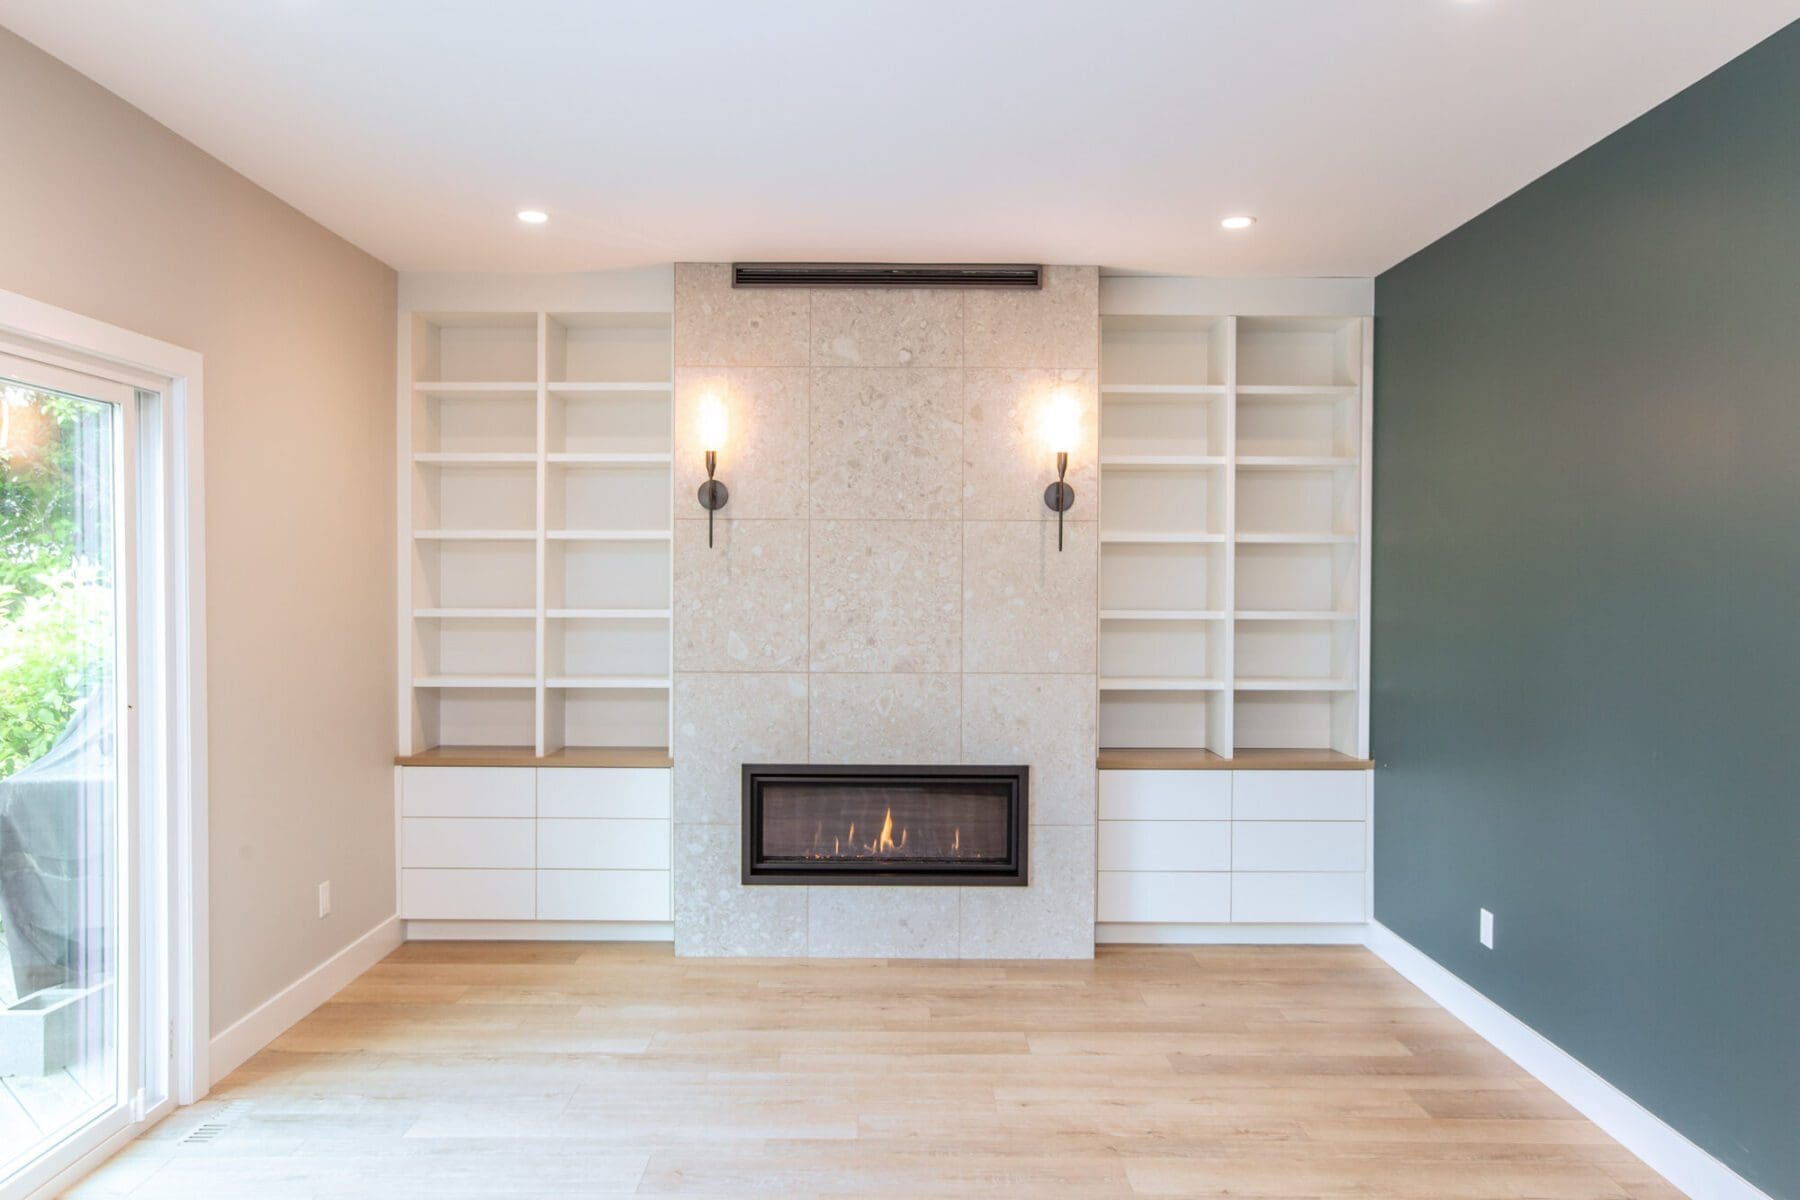 Shelves with Cabinetry around Fireplace, Contact Renovations blog